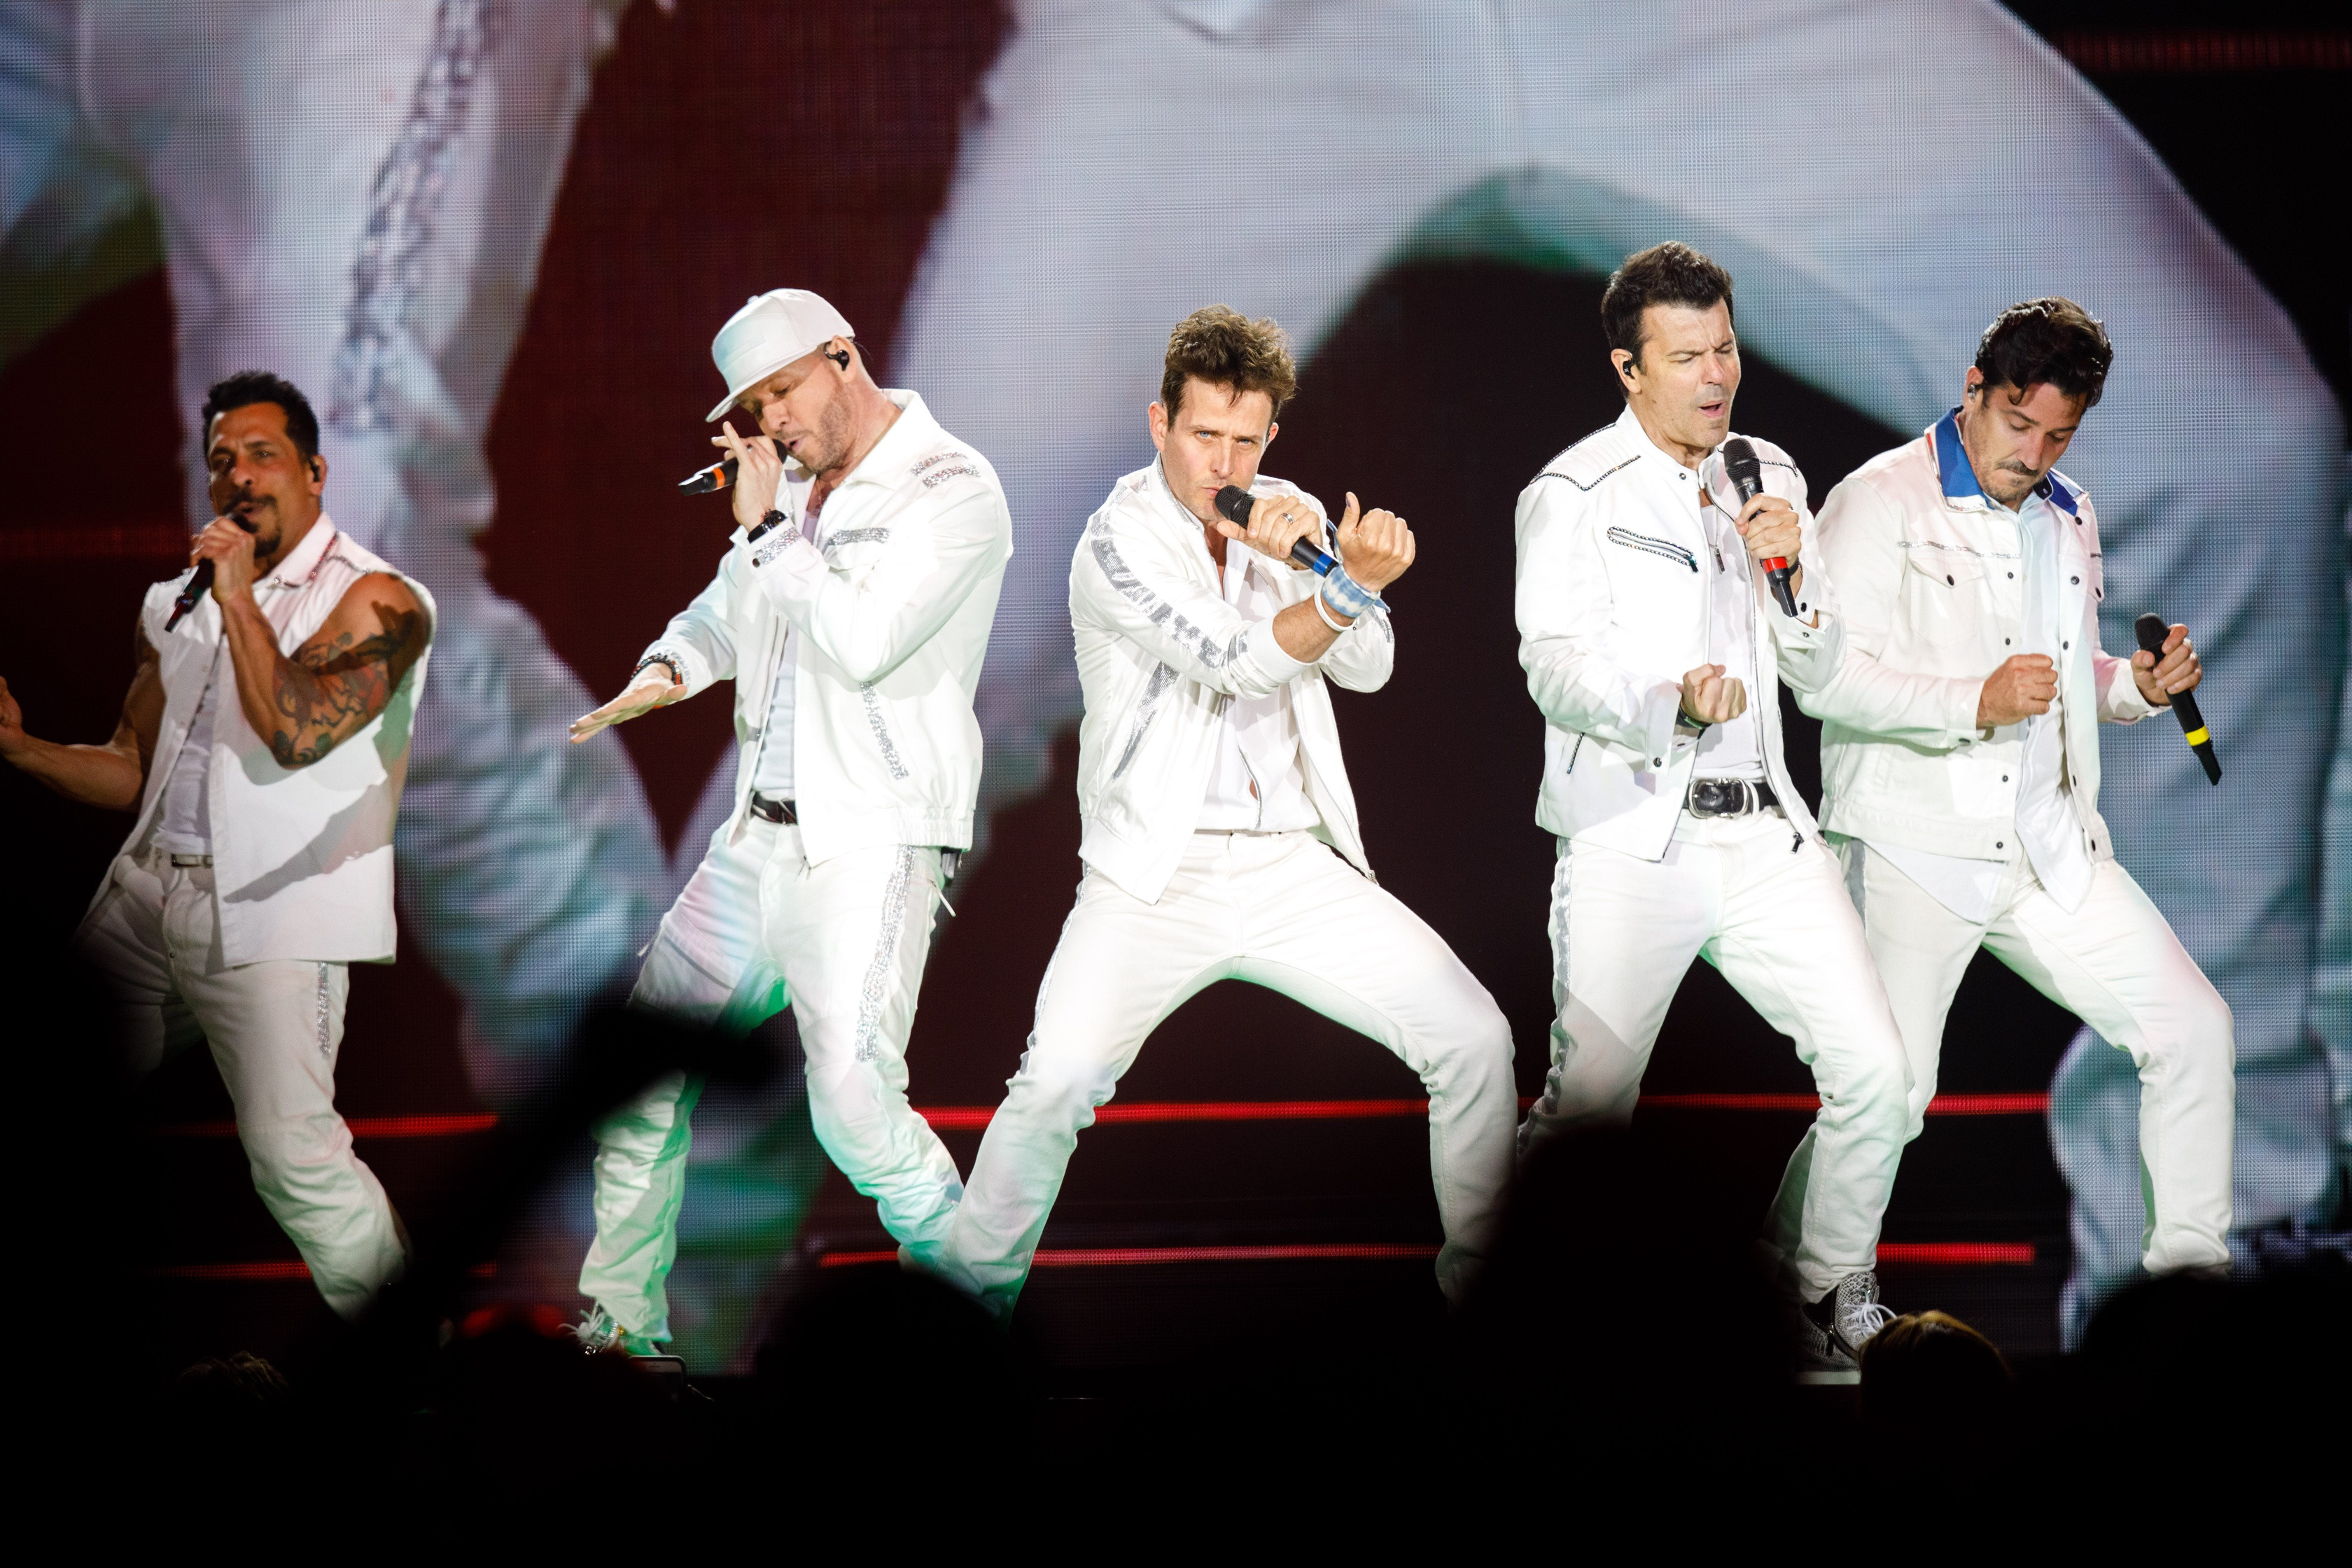 Interview: Joey McIntyre From NKOTB